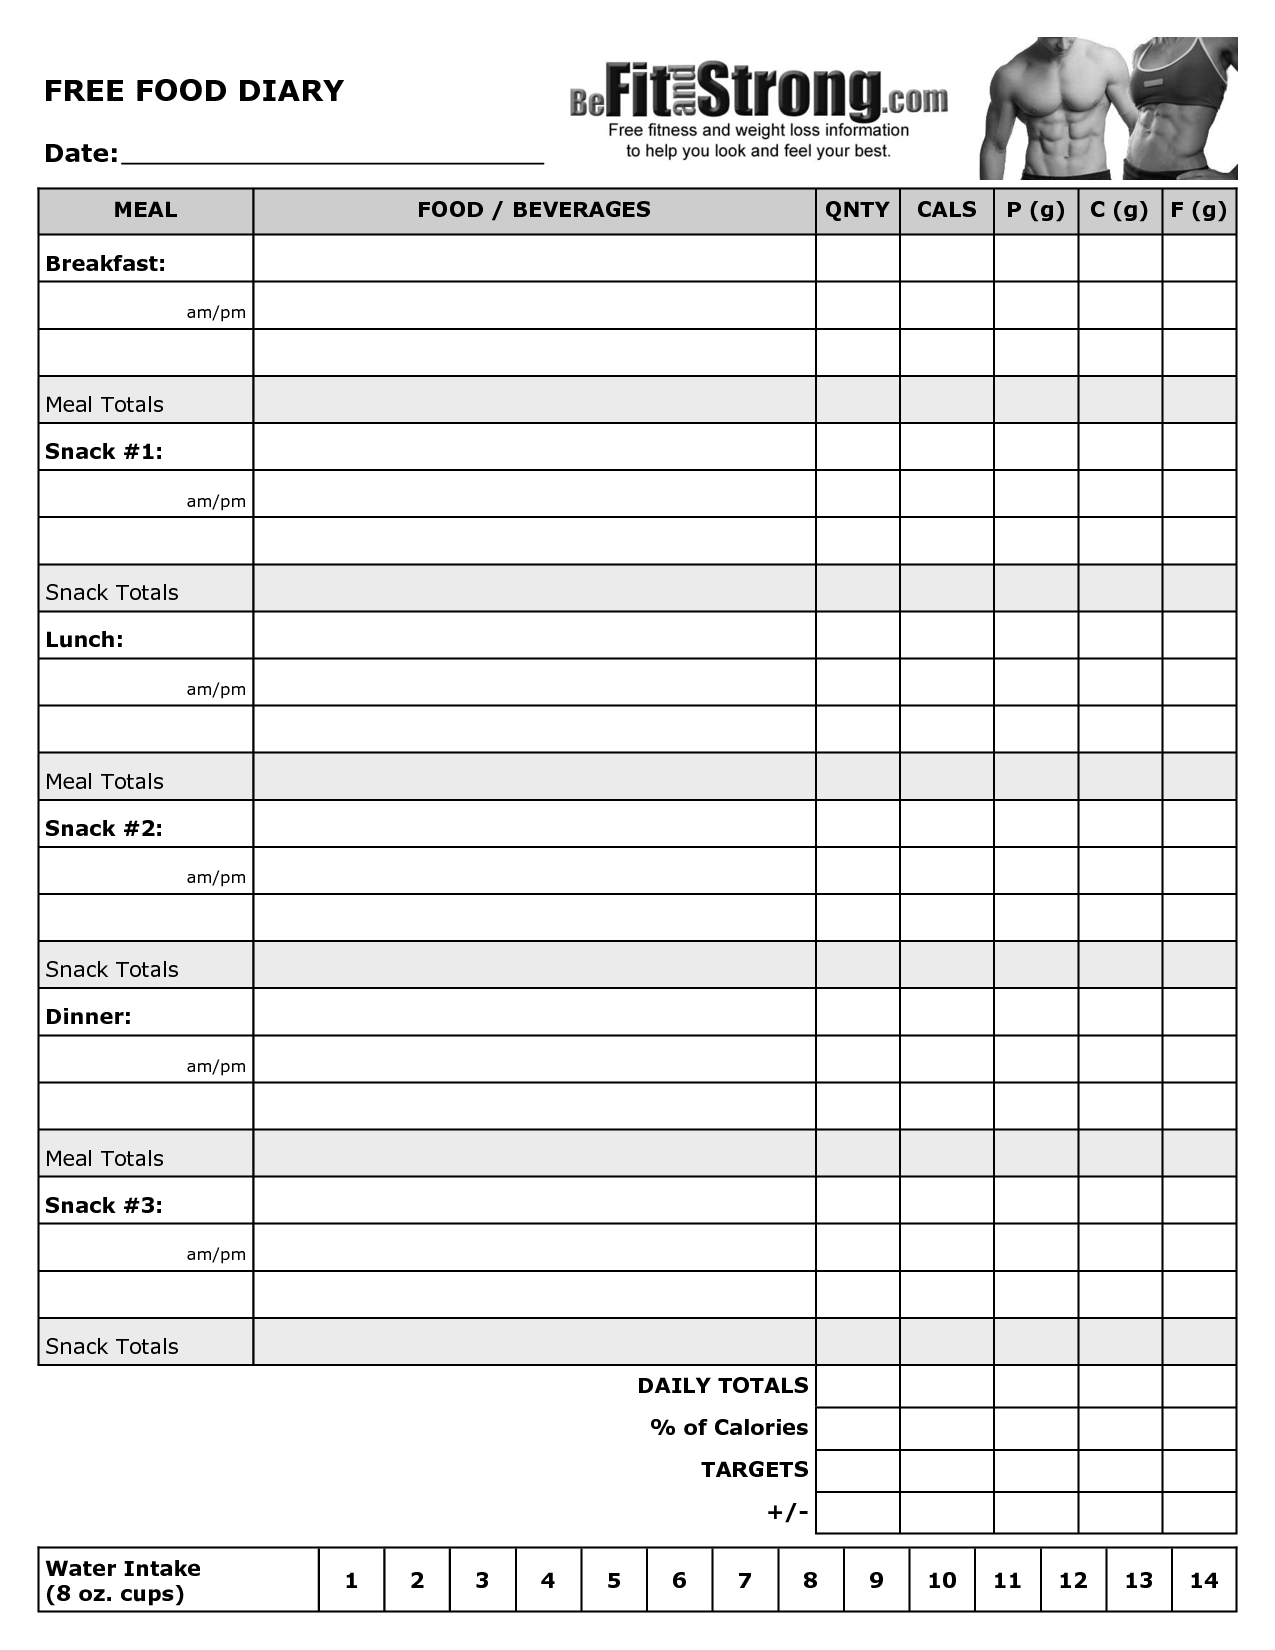 Free Printable Food Diary Template | Health, Fitness &amp;amp; Weight Loss | Free Printable Calorie Counter Worksheet